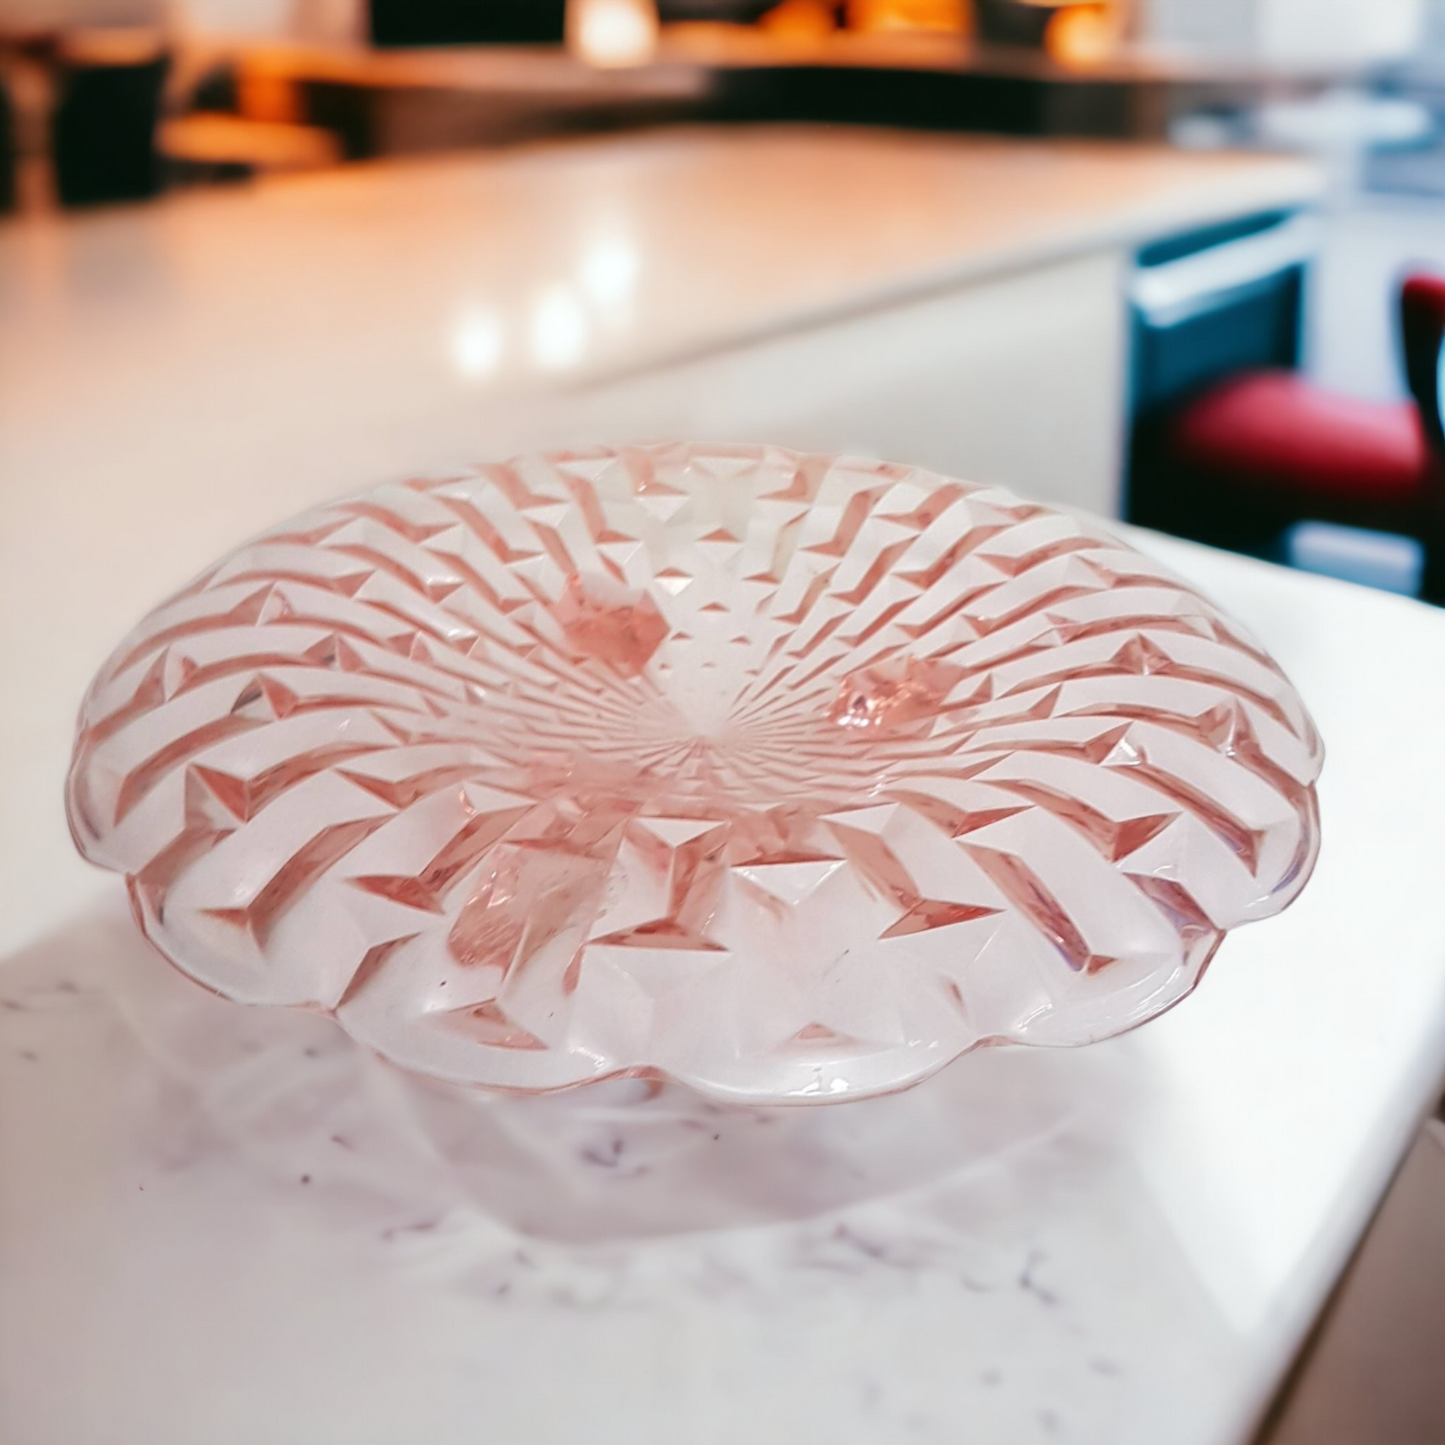 Tri-Footed Pink Depression Glass Dessert Serving Tray